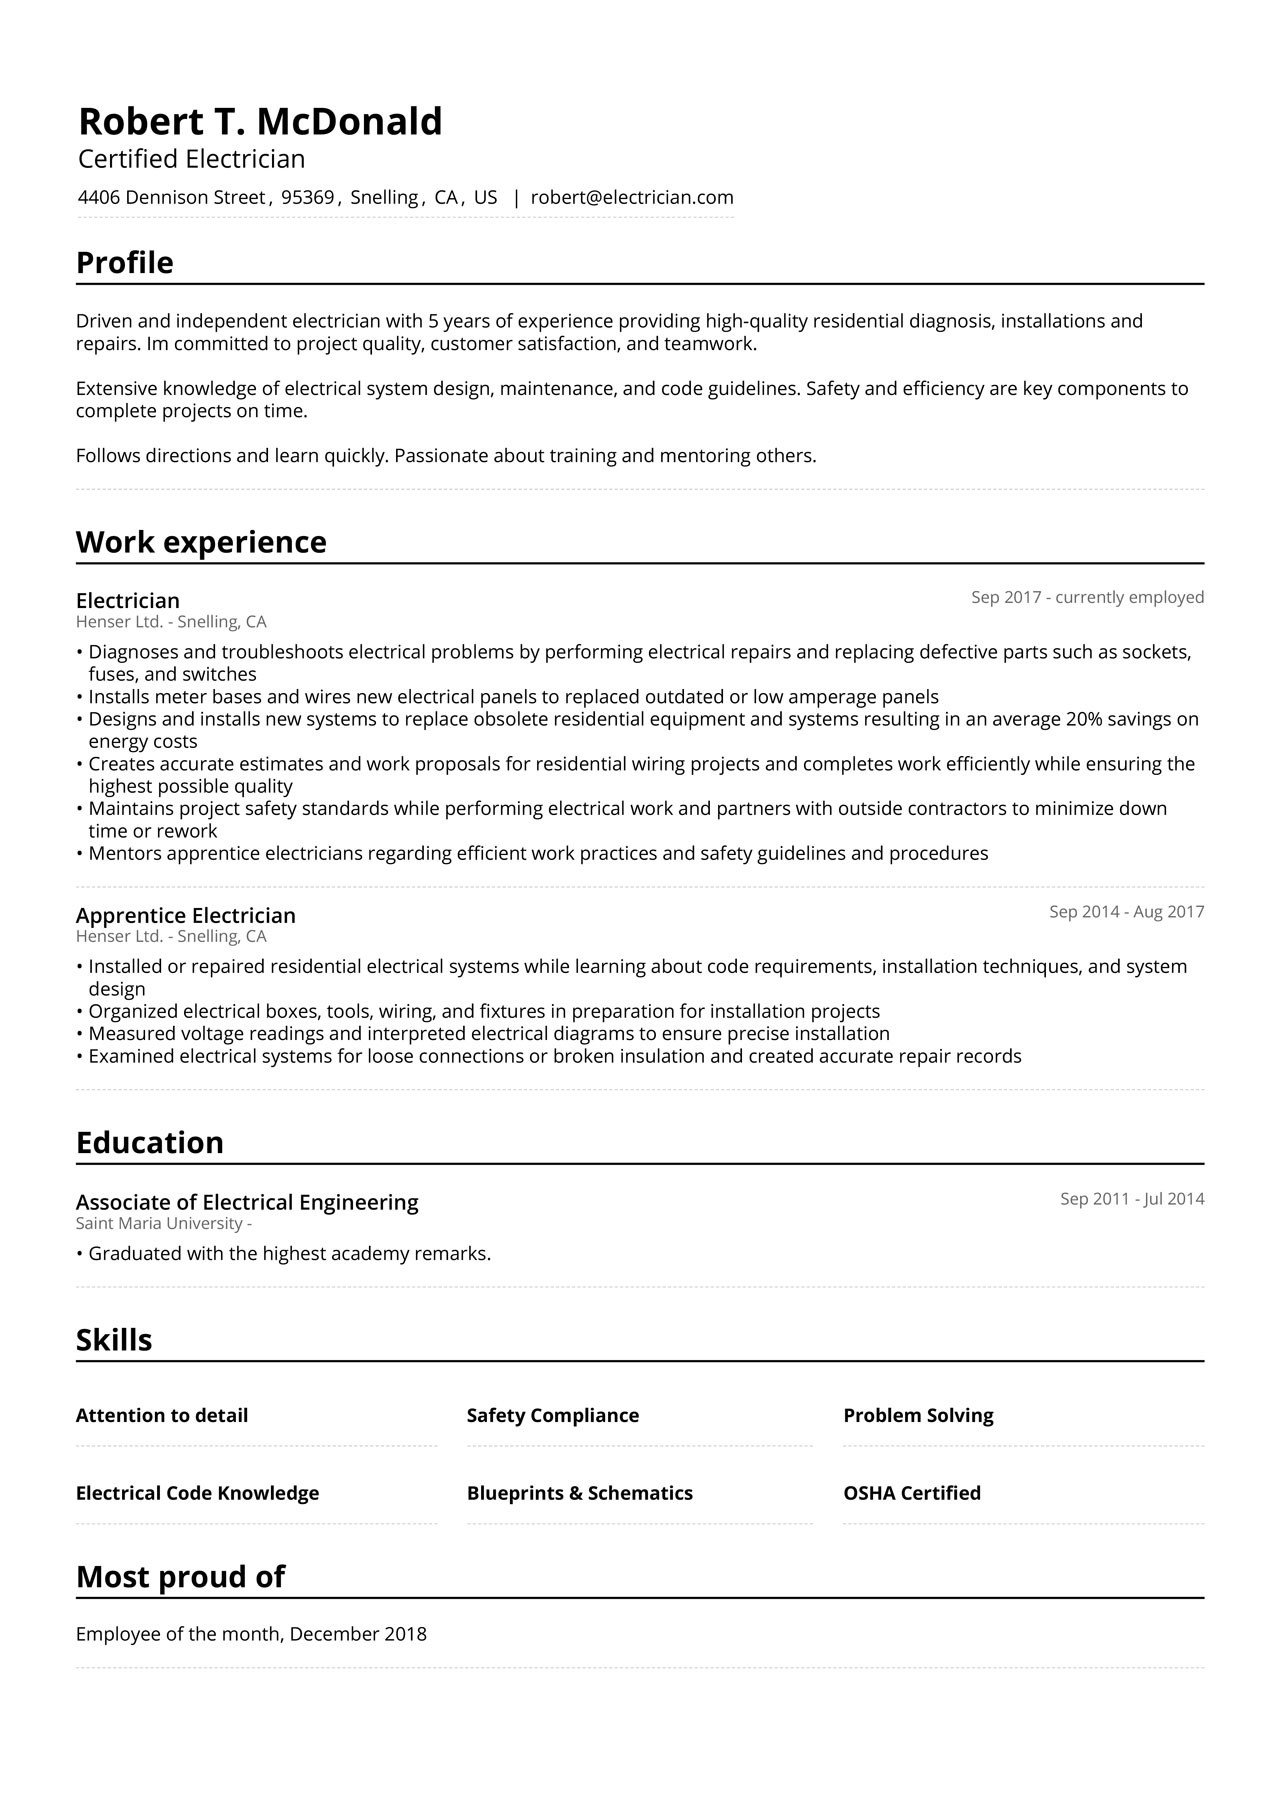 Sample Of A Good Resume Applying for A Electrician Electrician Resume Example & Guide [2022] – Jofibo